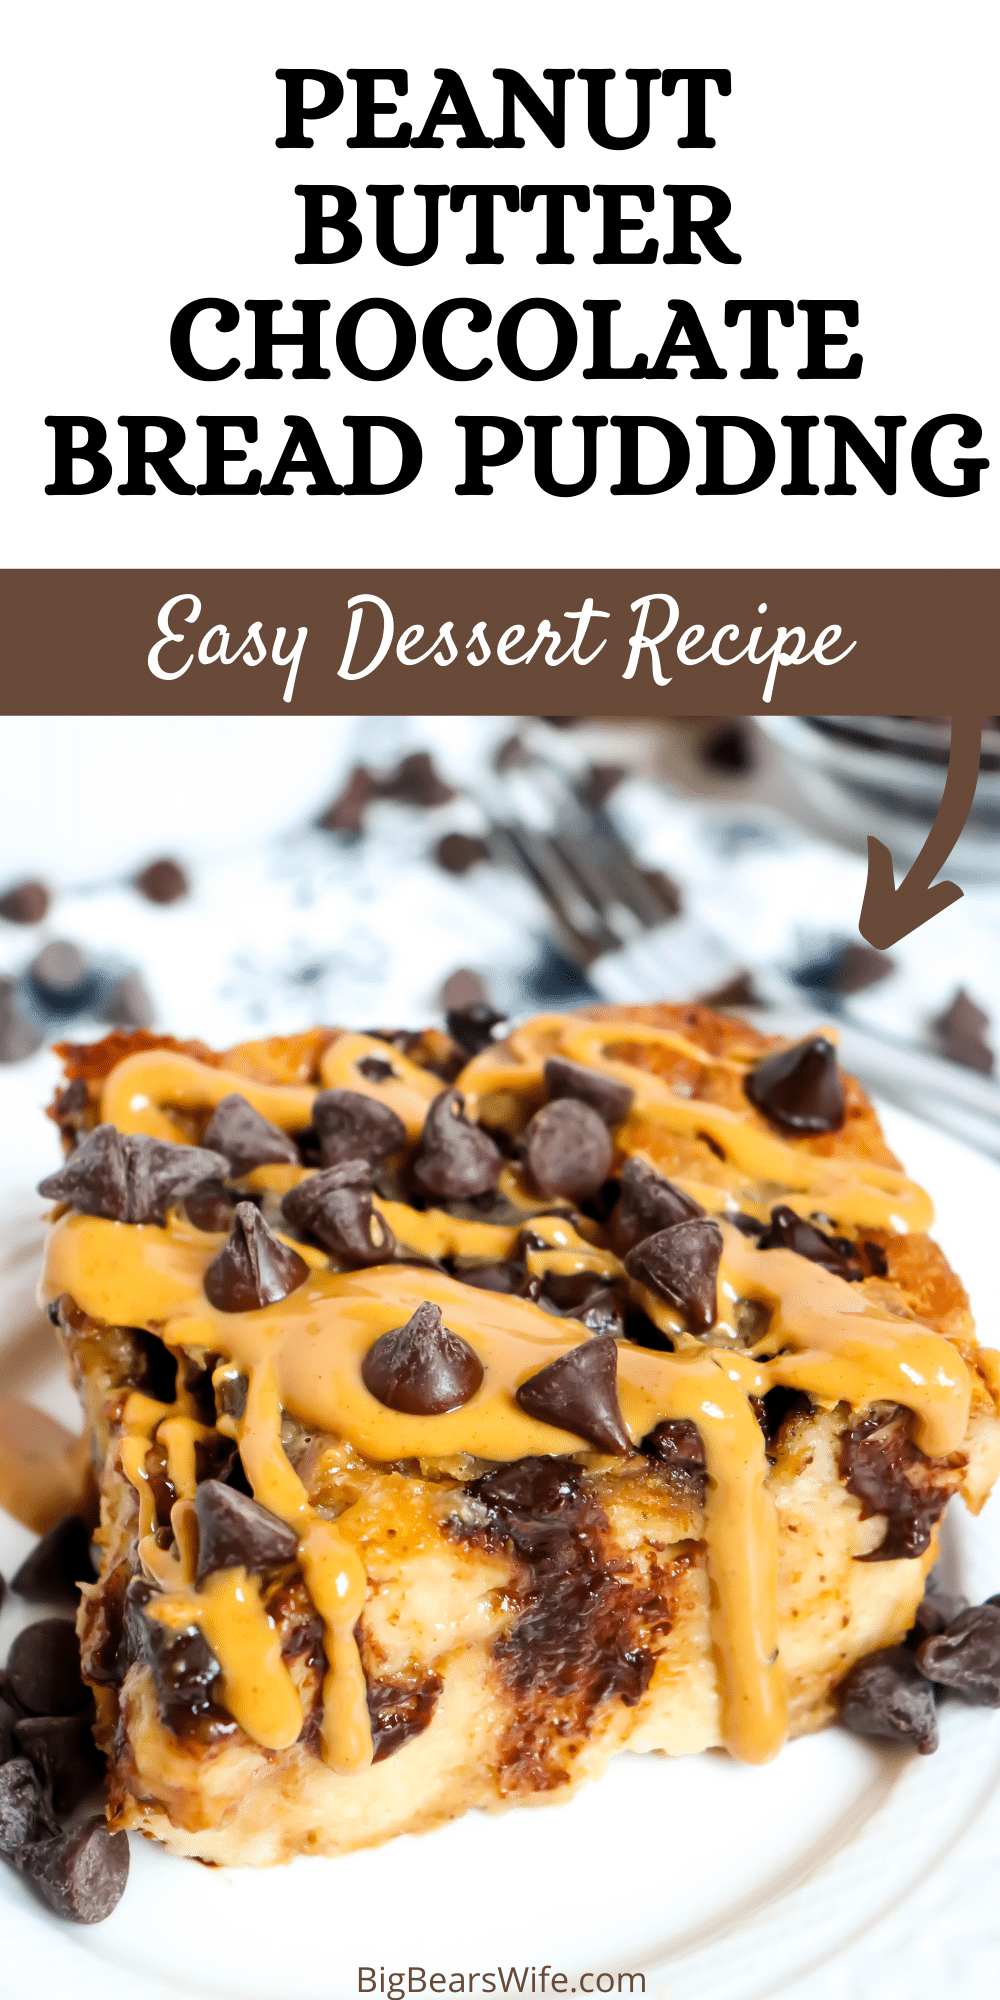 Peanut Butter and Chocolate lovers rejoice! This peanut butter chocolate bread pudding is the perfect dessert with both flavors combined!  via @bigbearswife